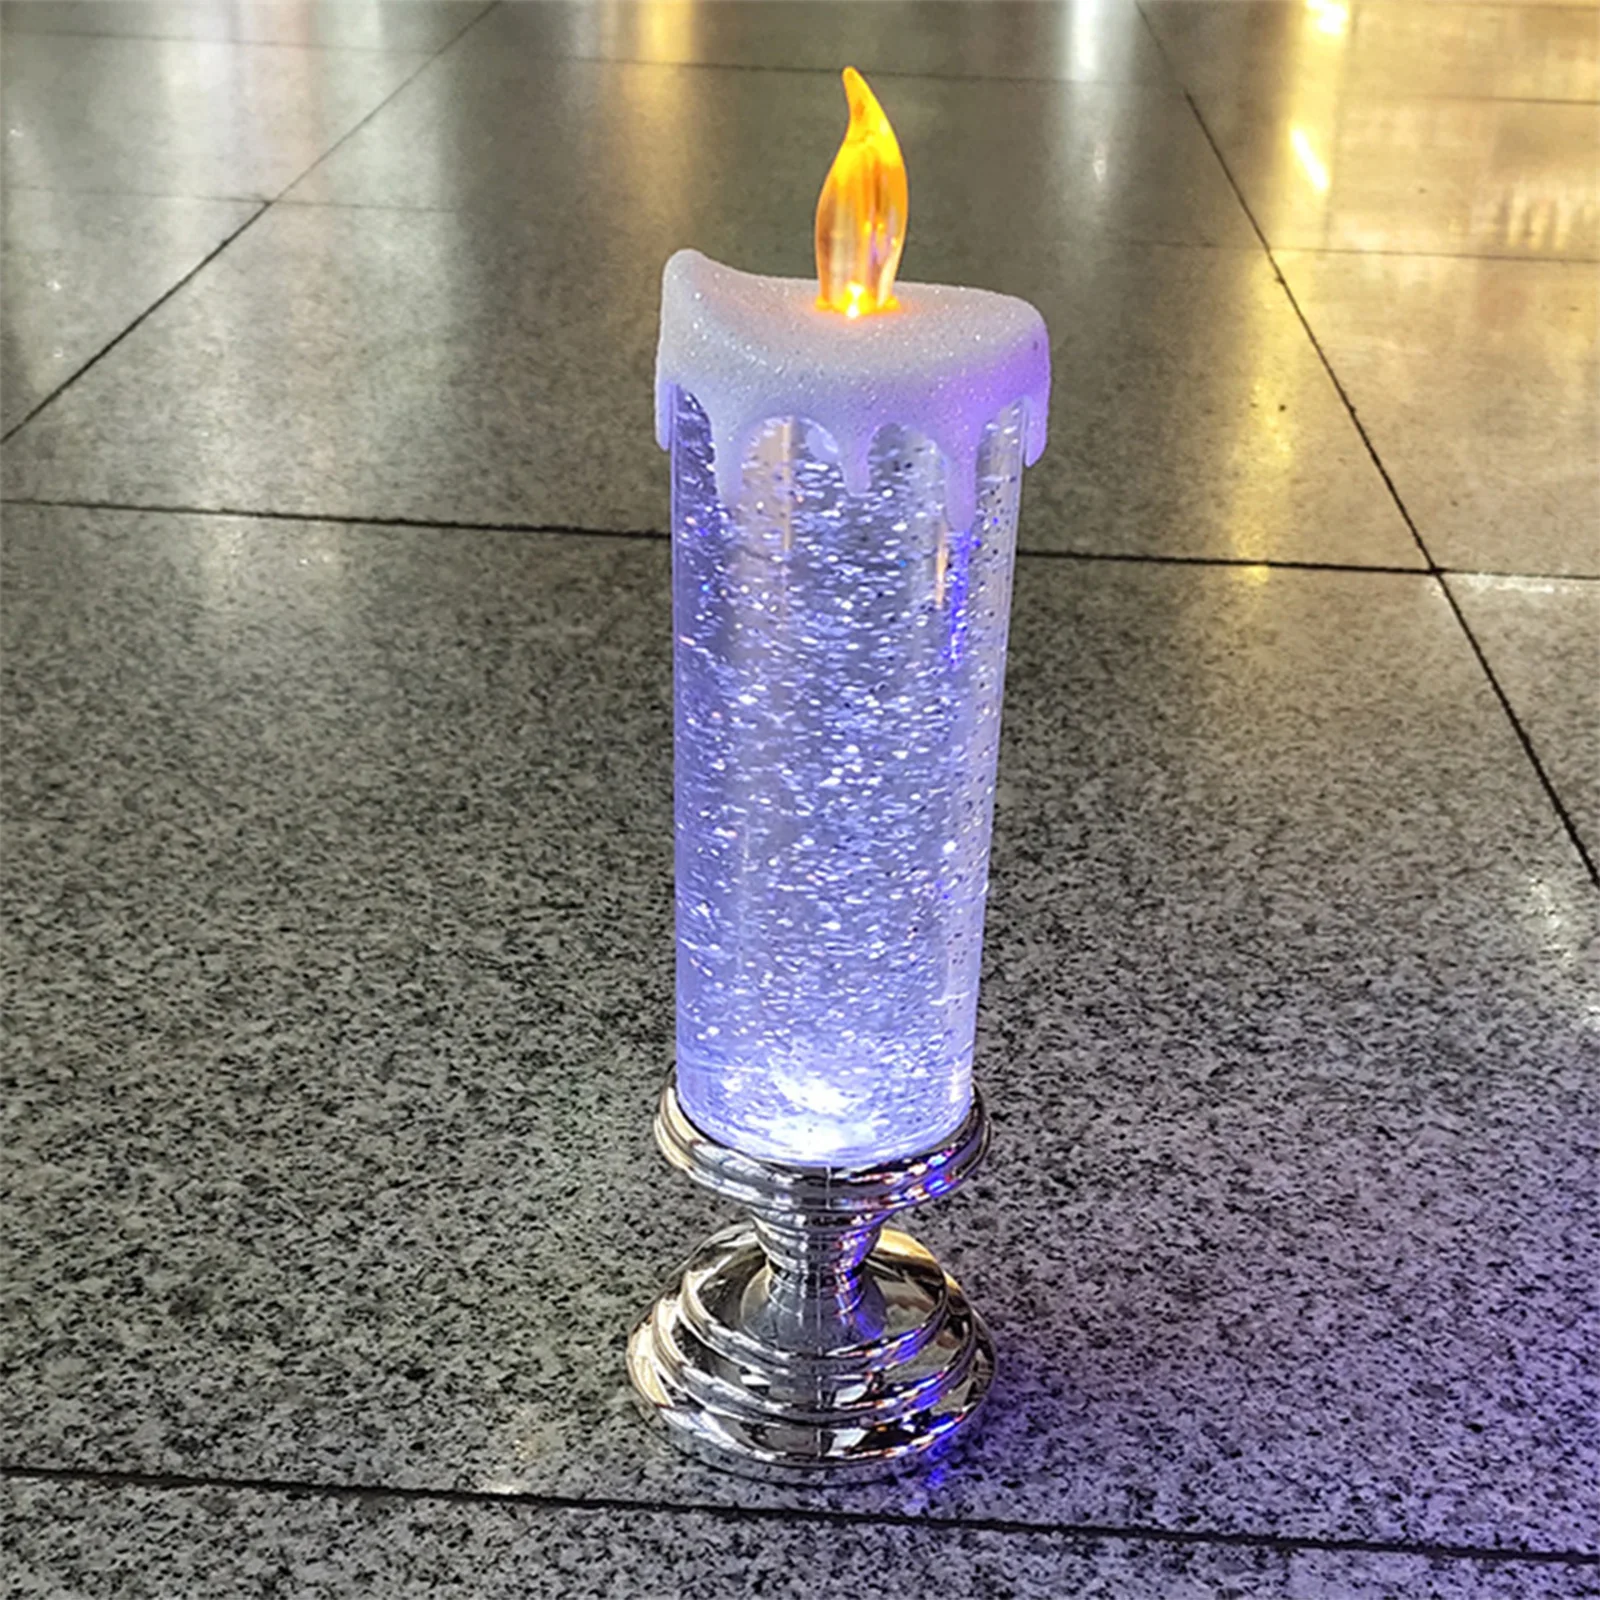 As Is 13 Illuminated Glitter Pedestal Candle by Valerie